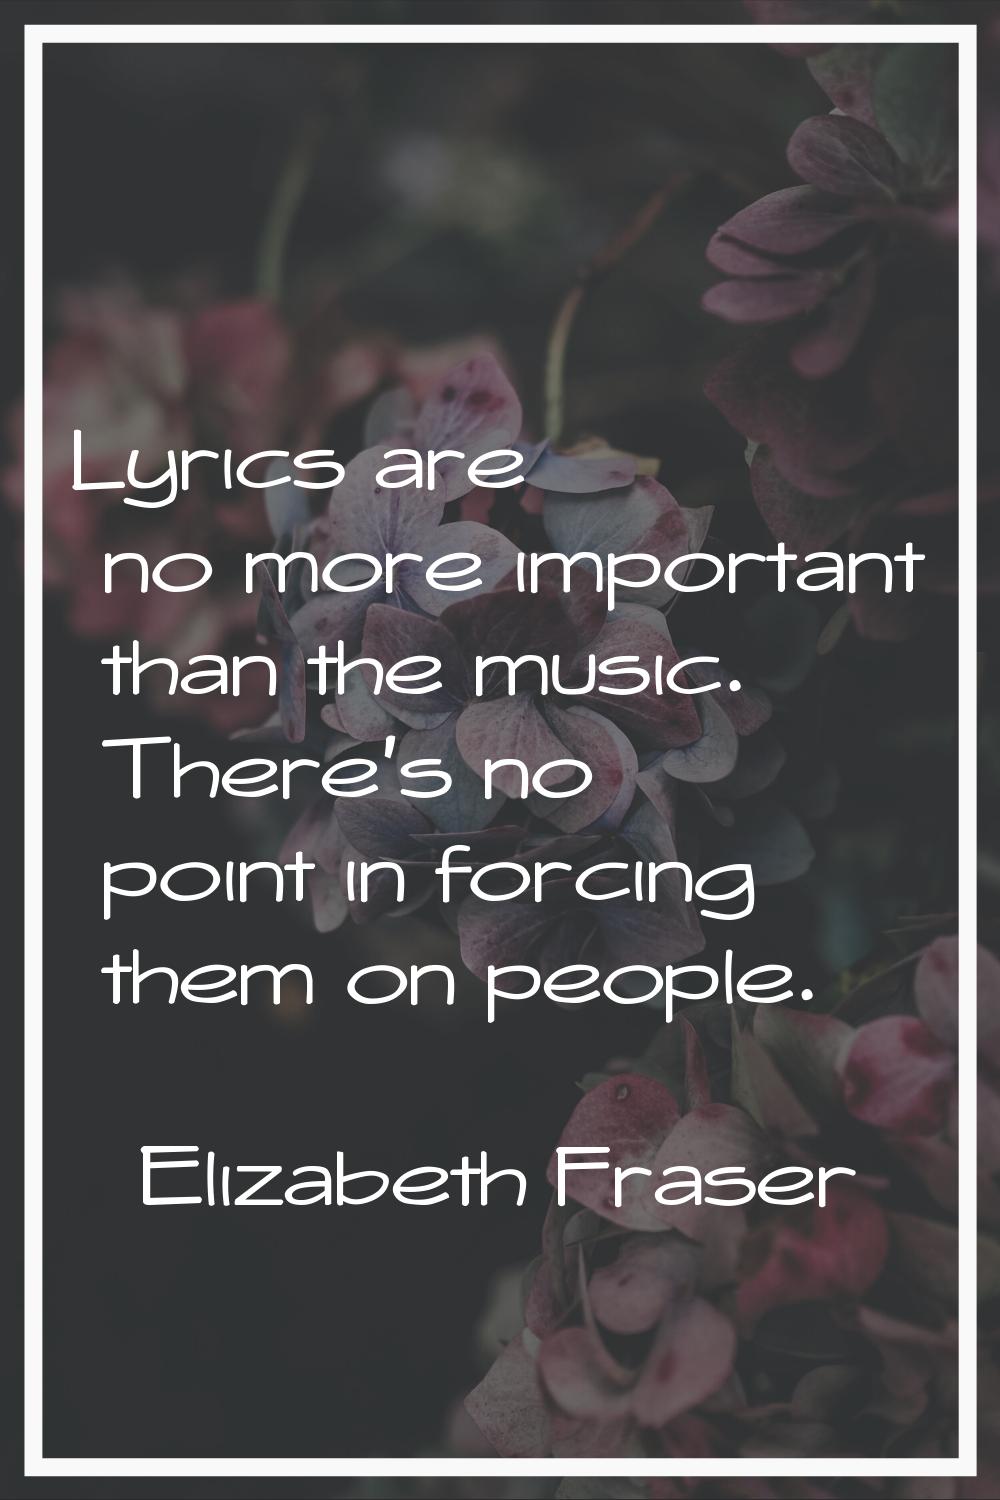 Lyrics are no more important than the music. There's no point in forcing them on people.